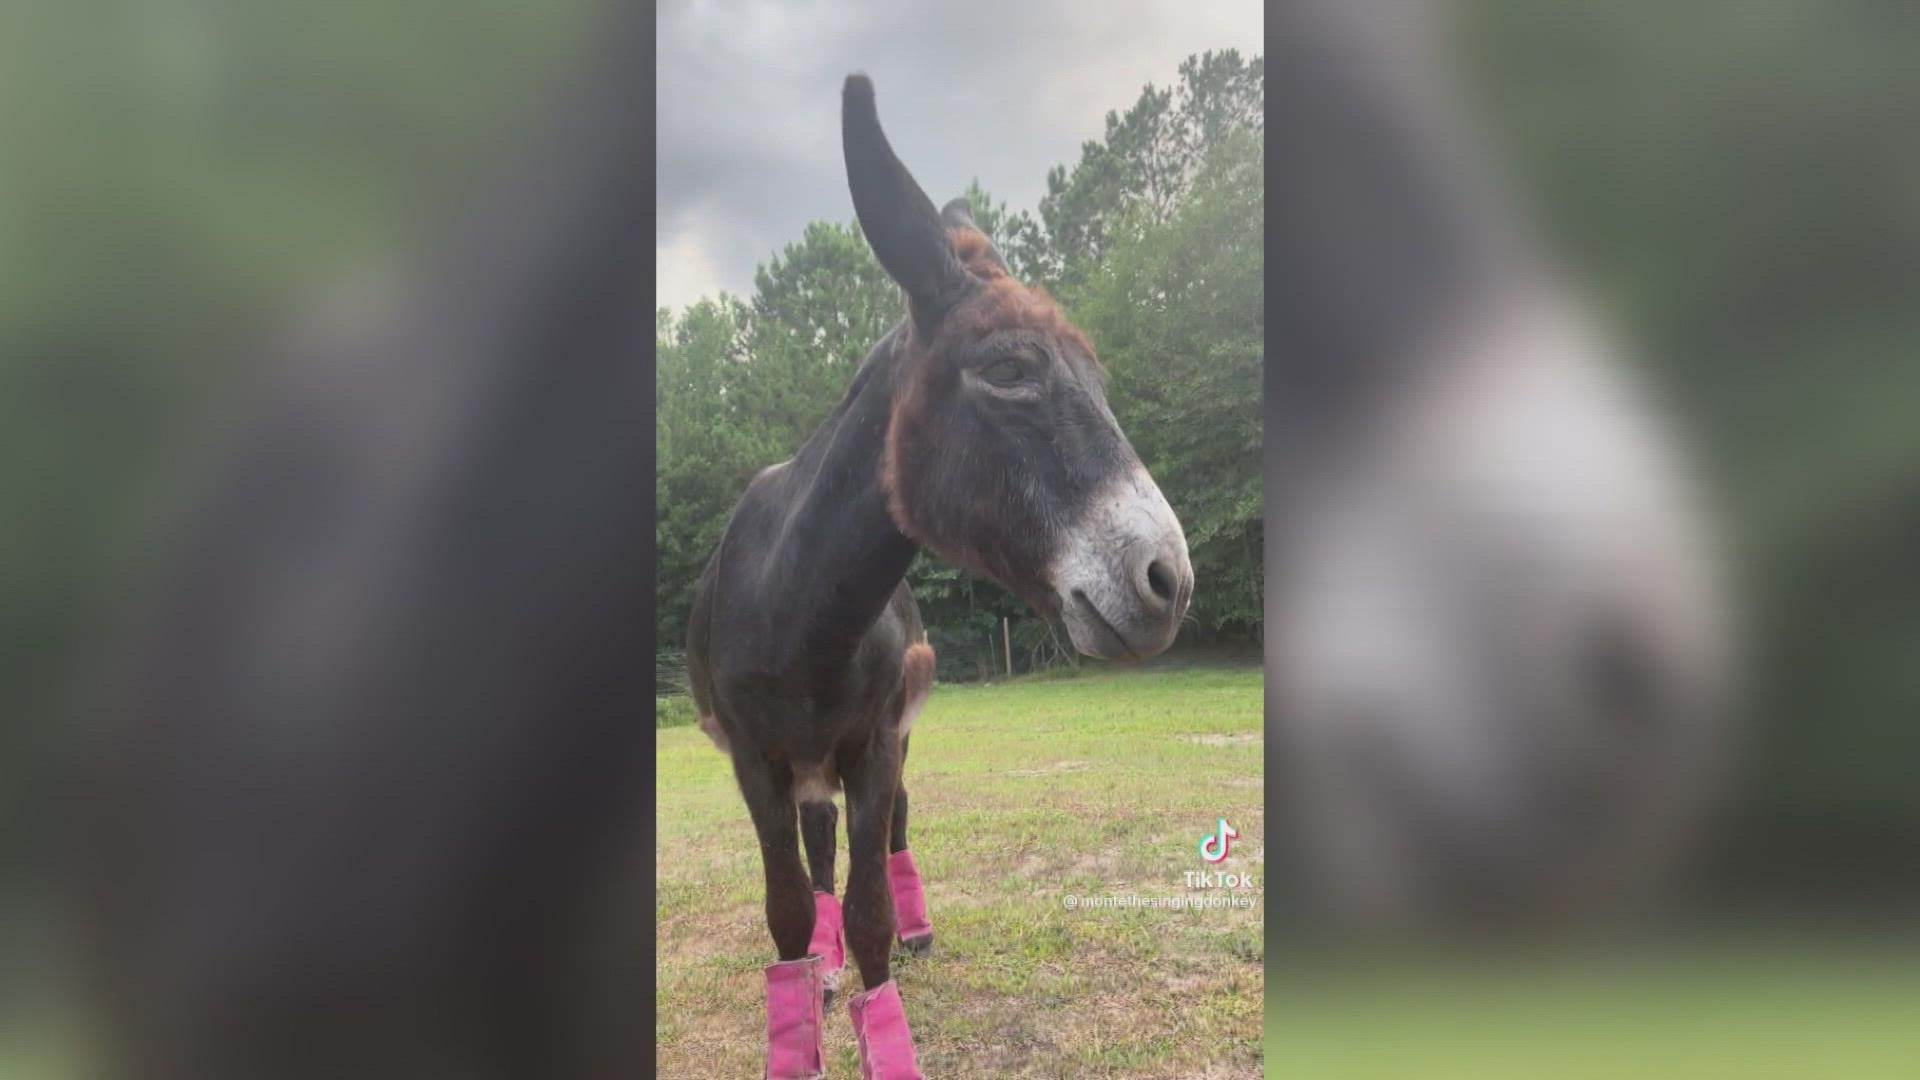 Monte, the 24-year-old singing donkey from Texas, is trending on TikTok for the way he sings to when he's hungry or excited. Take a listen!